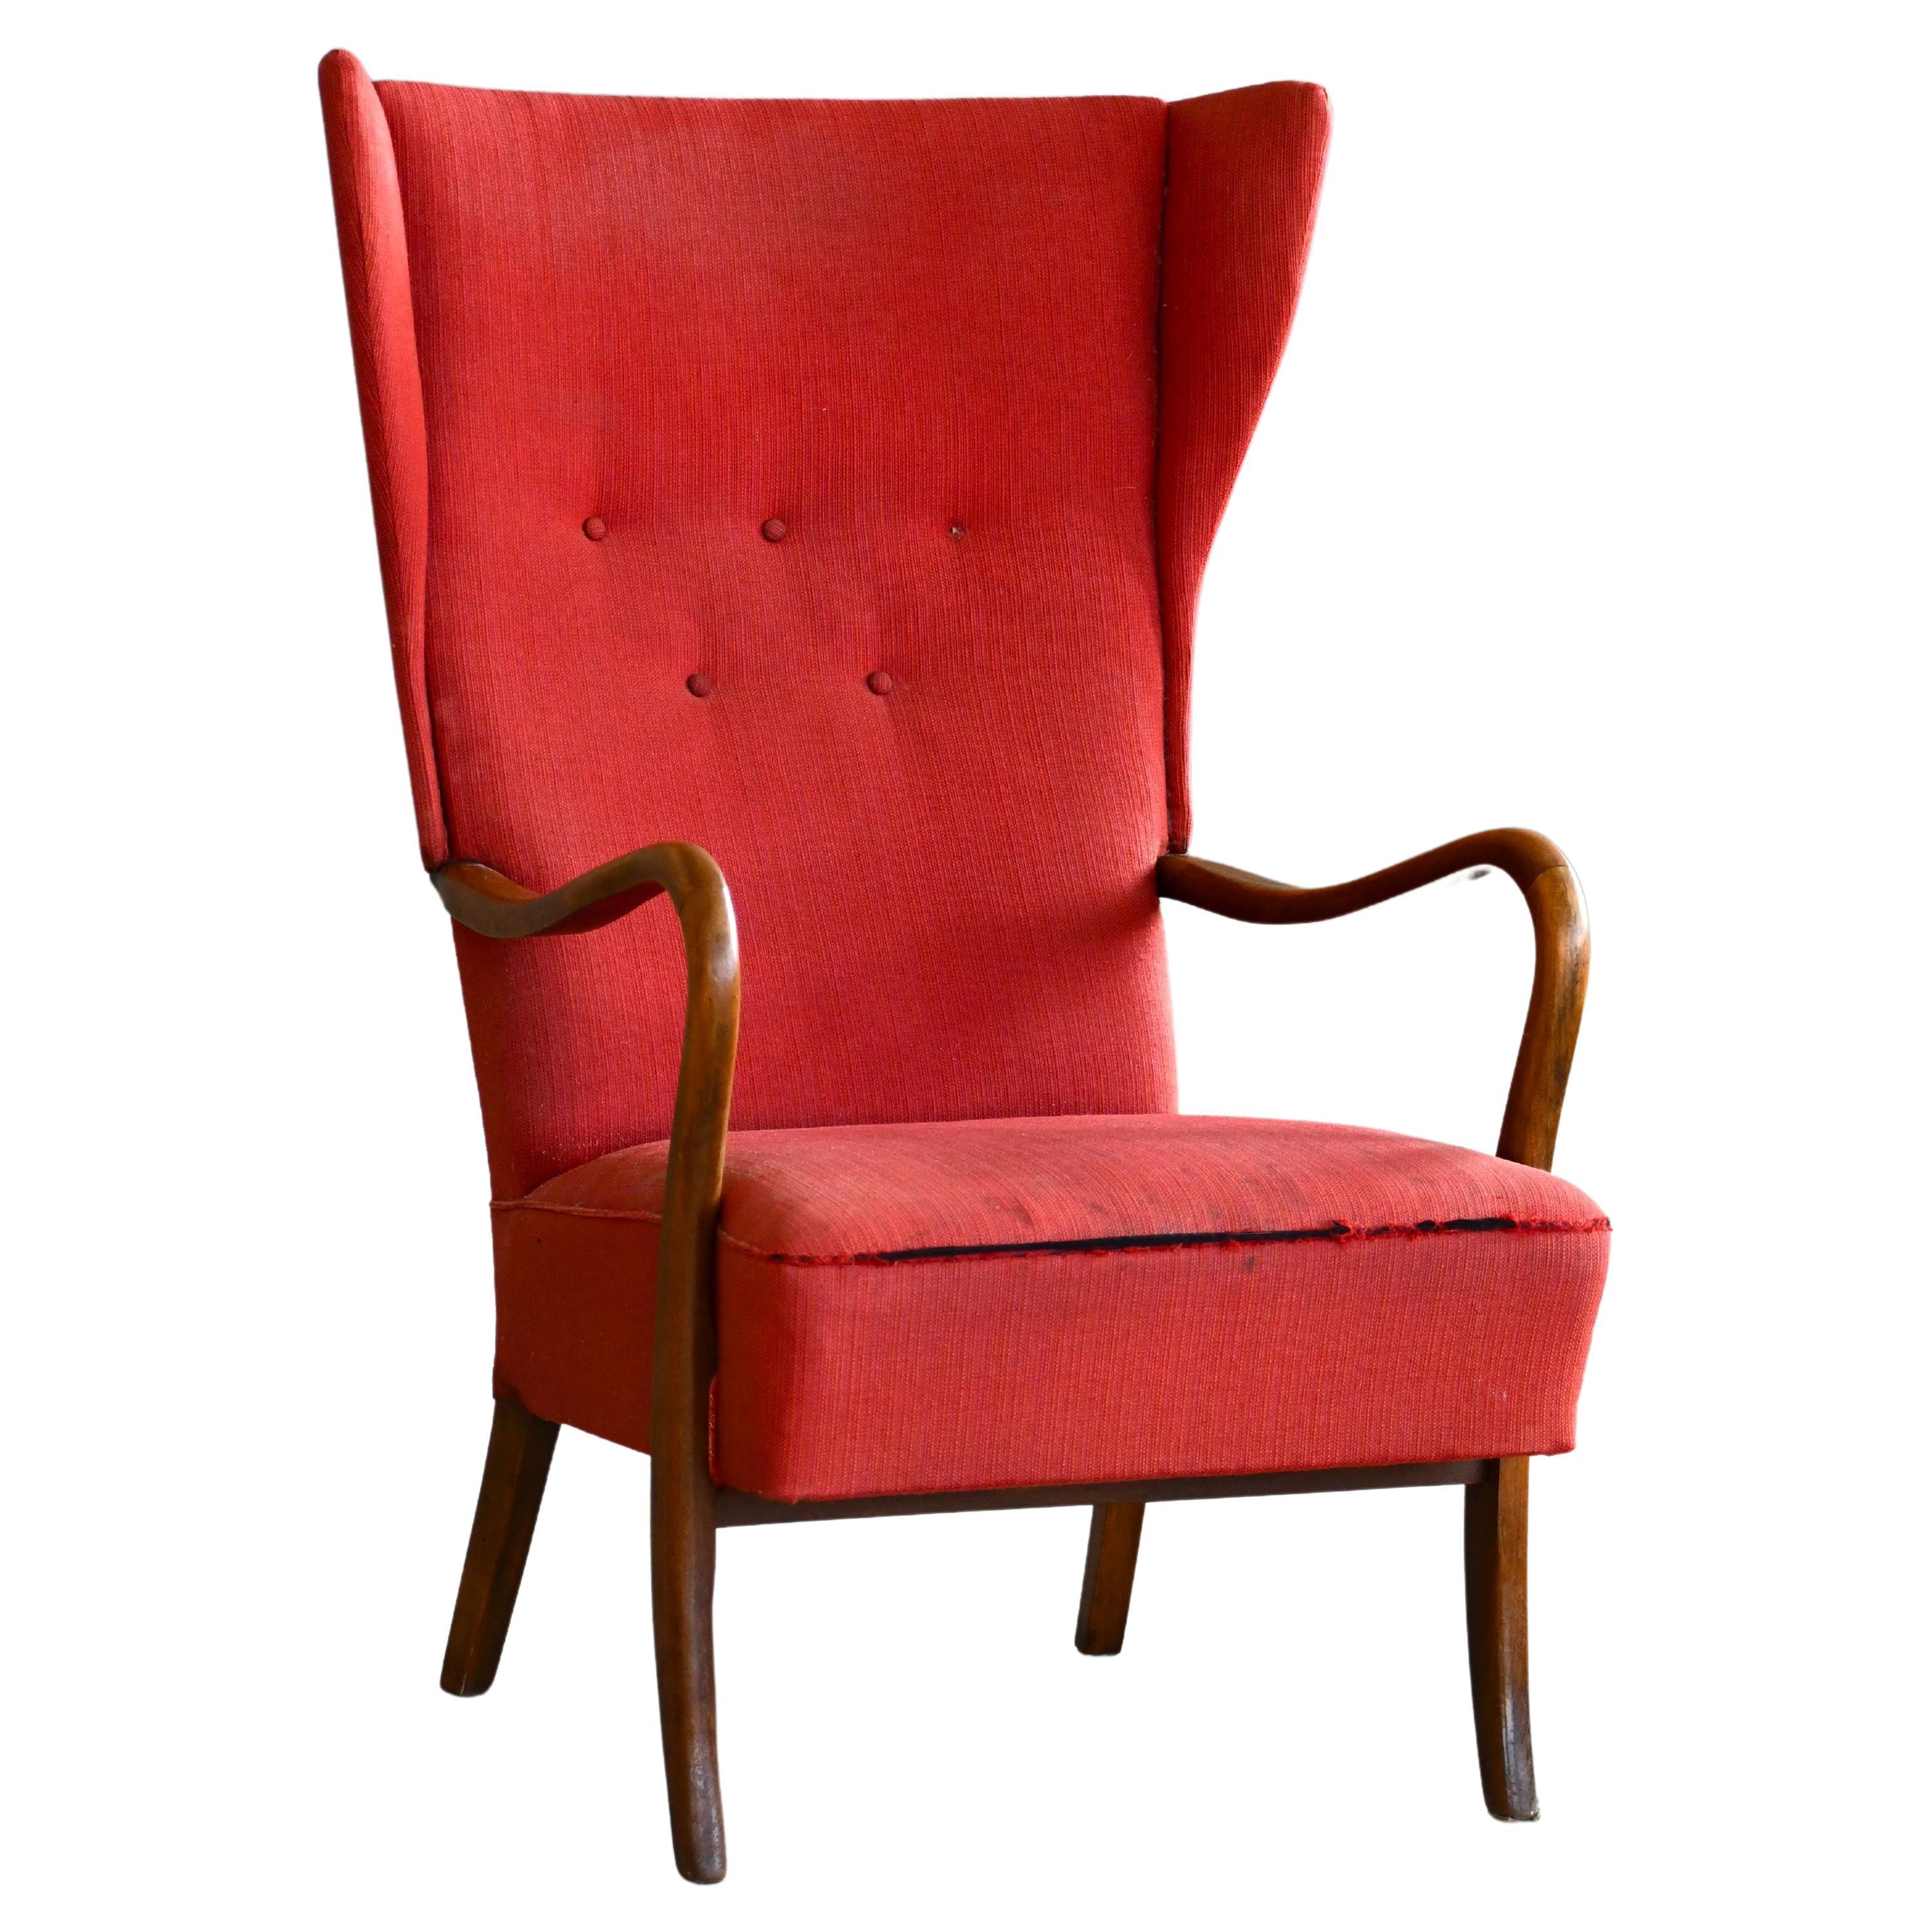 Danish Easy Wingback Chair with Open Armrests by Alfred Christensen, 1940's For Sale